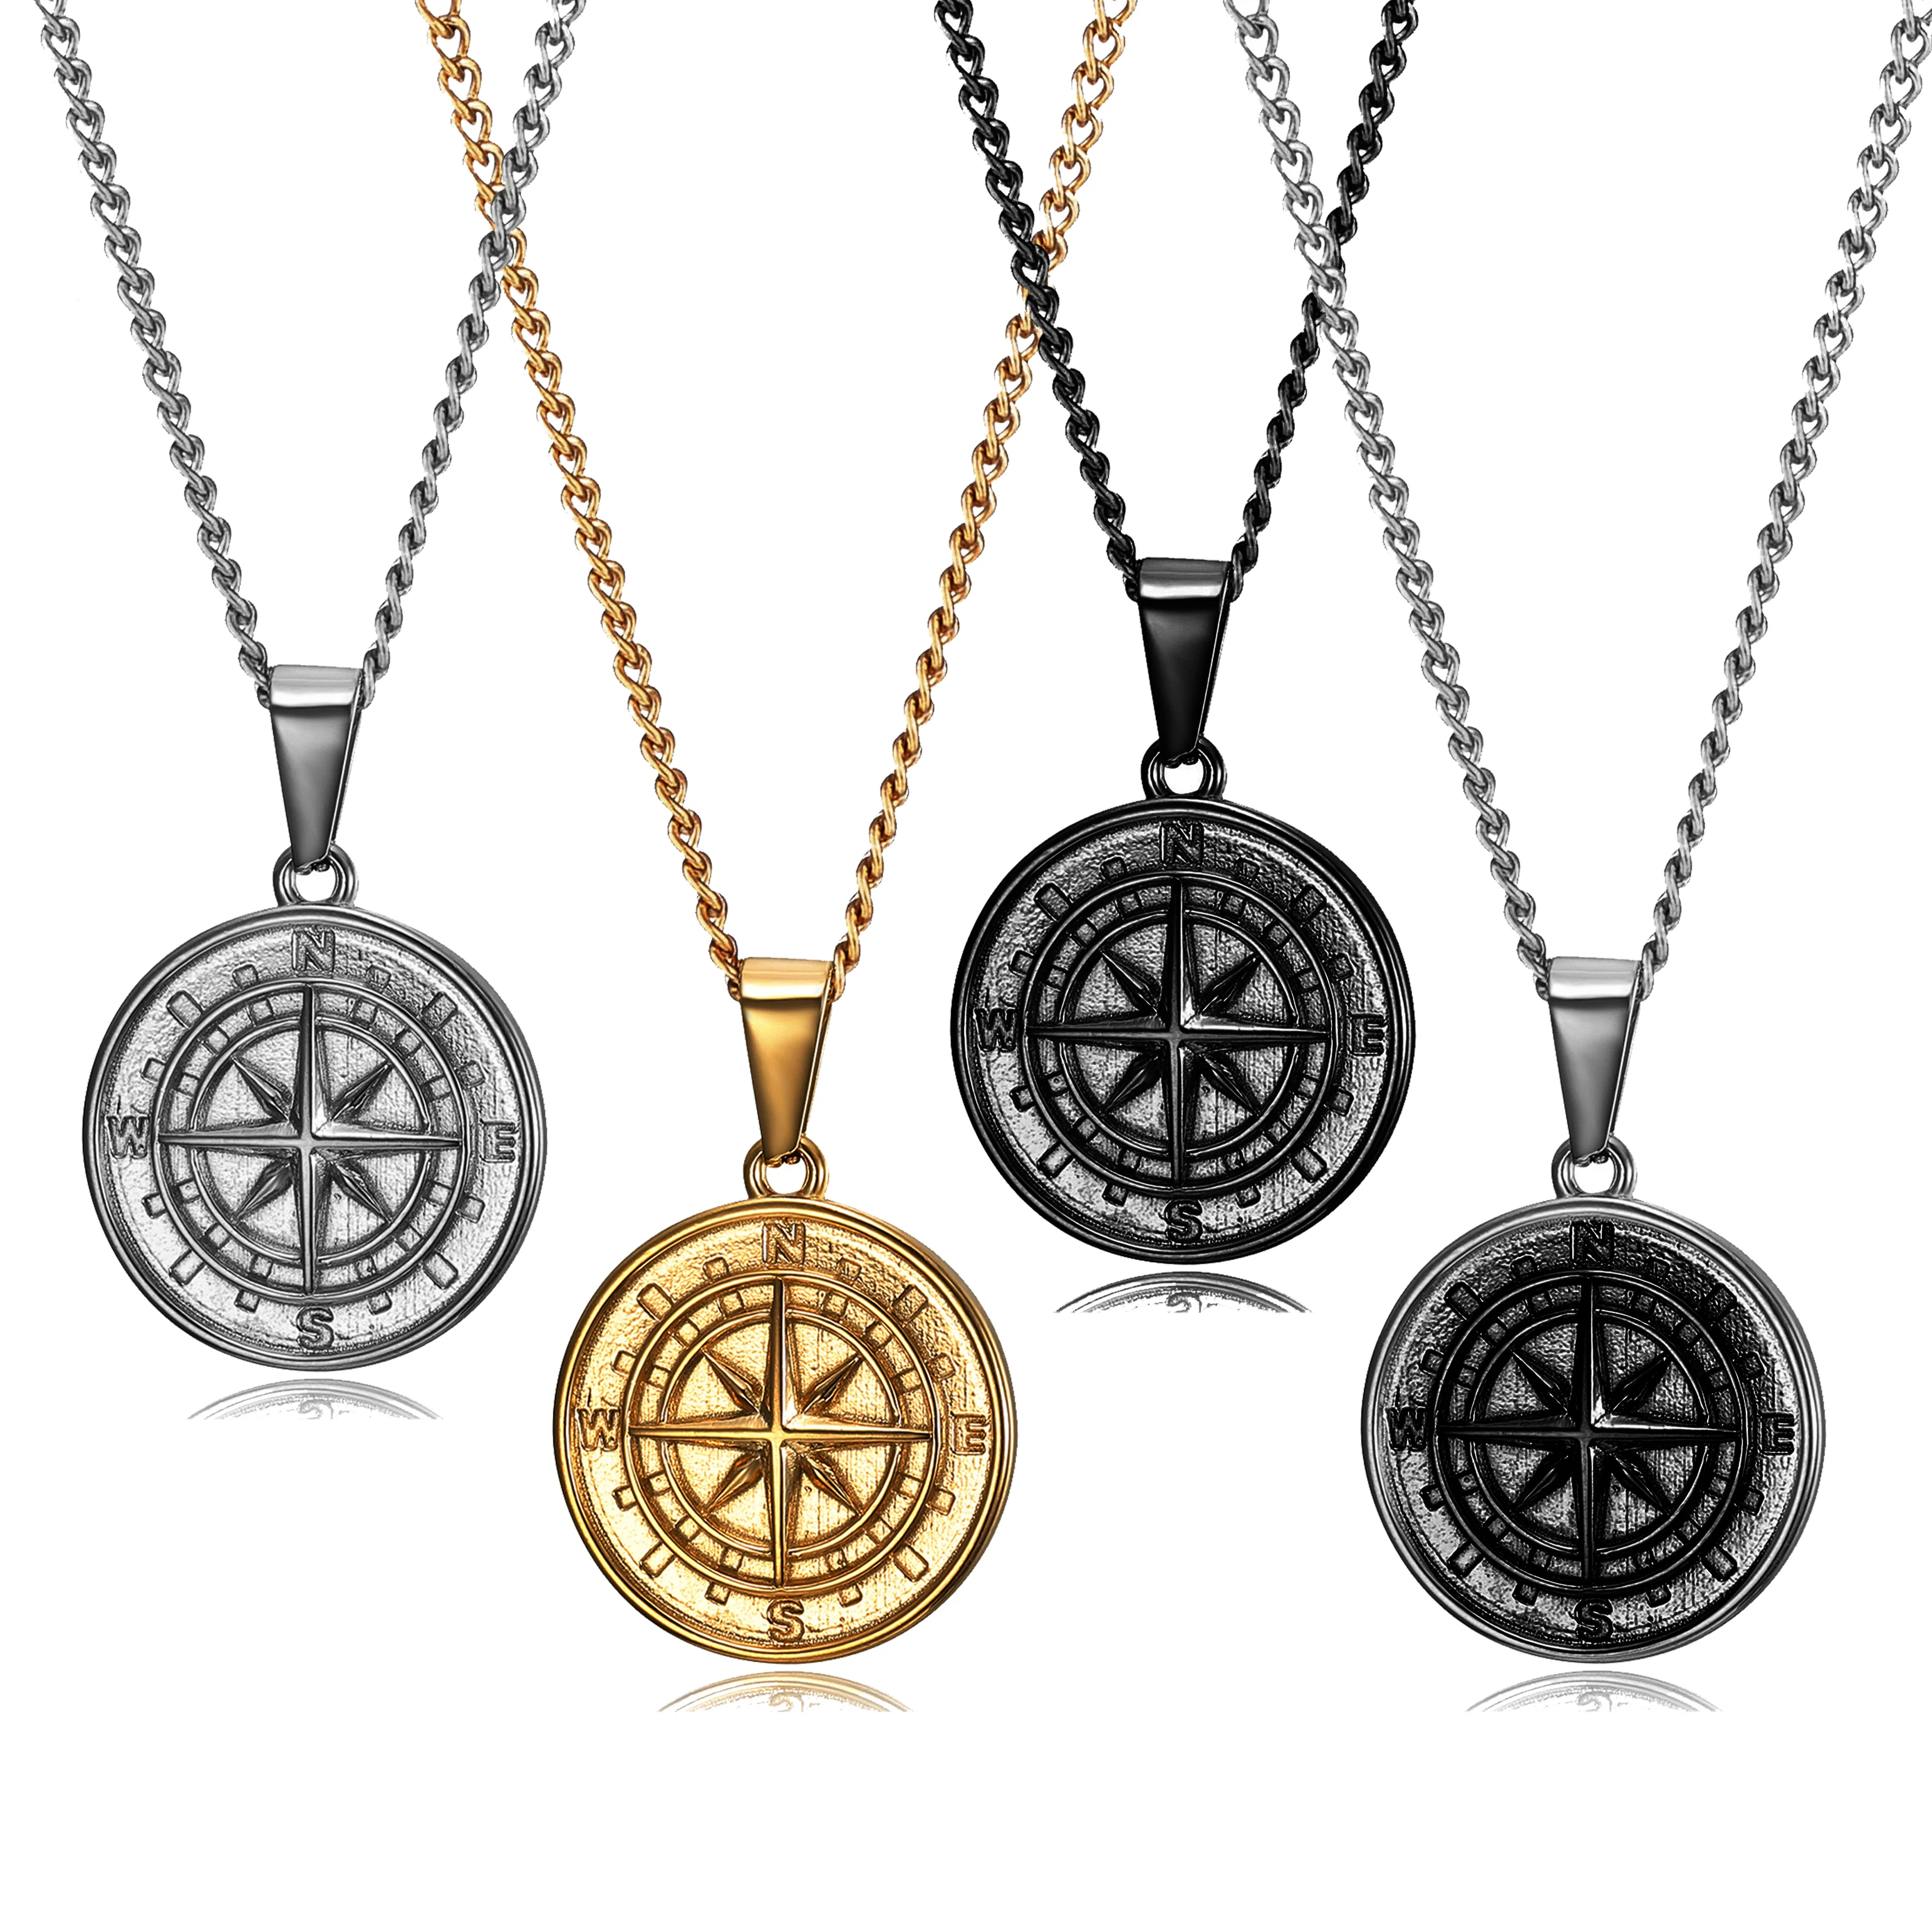 

In Stock Fashion North Star Jewelry Retro Black Silver 18K Gold Plated Stainless Steel Compass Necklace for Men Vintage Necklace